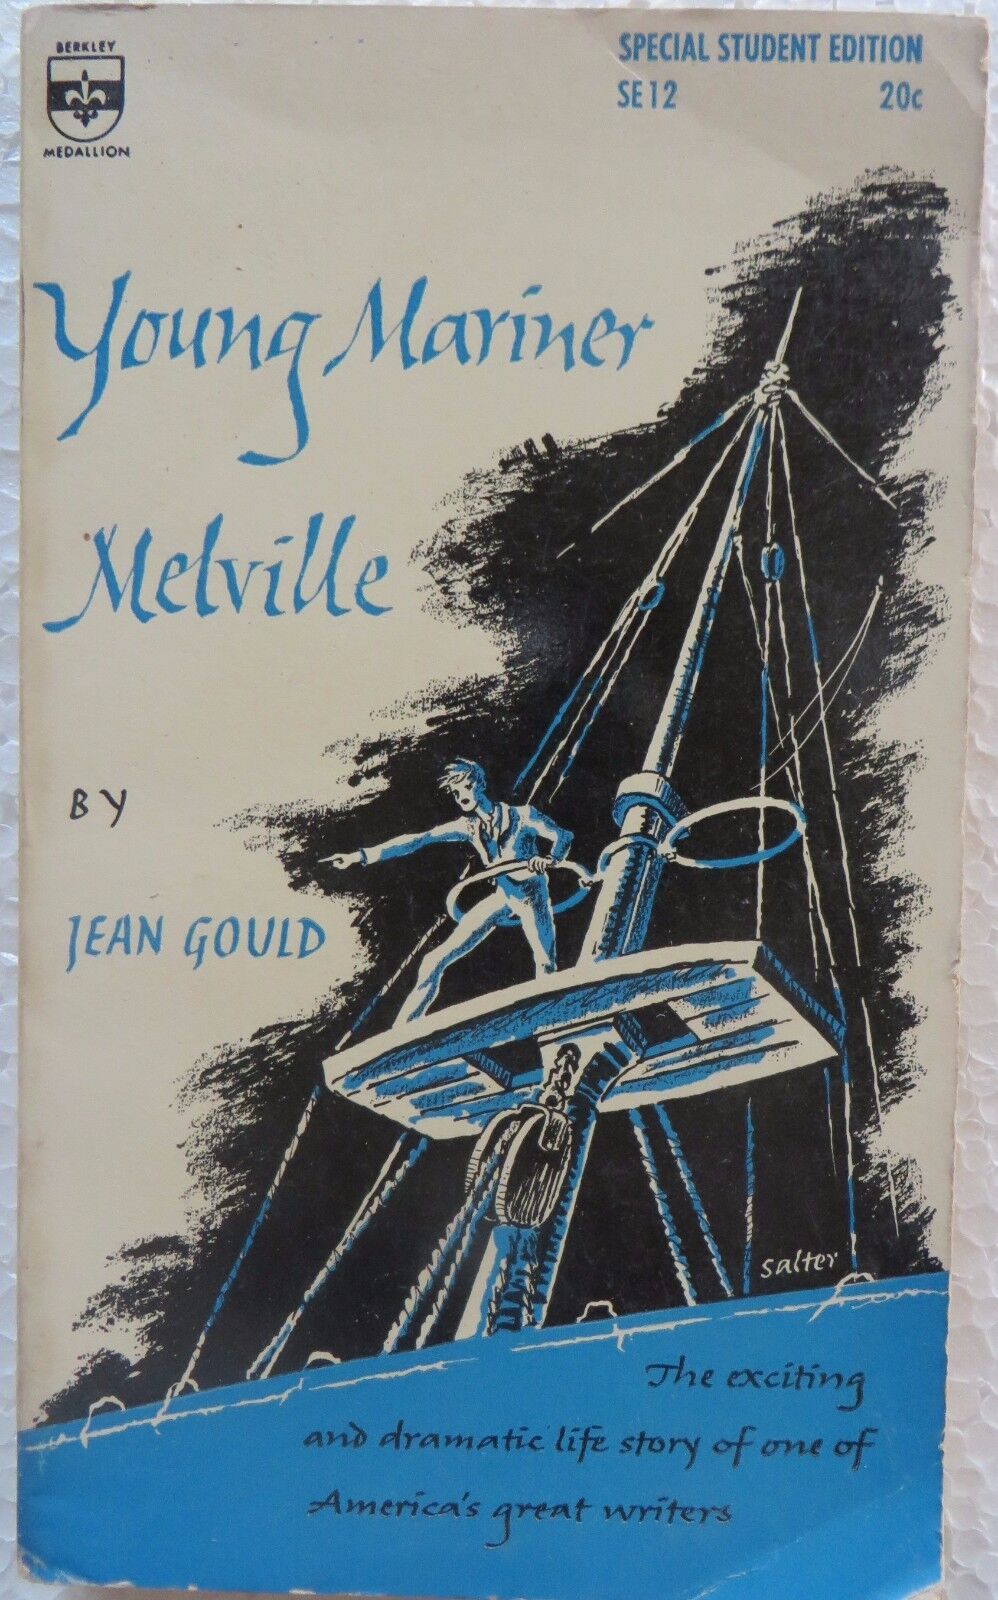 VINTAGE BOOK YOUNG MARINER MELVILLE BY JEAN GOULD 1963 STORY OF AMERICAN WRITER